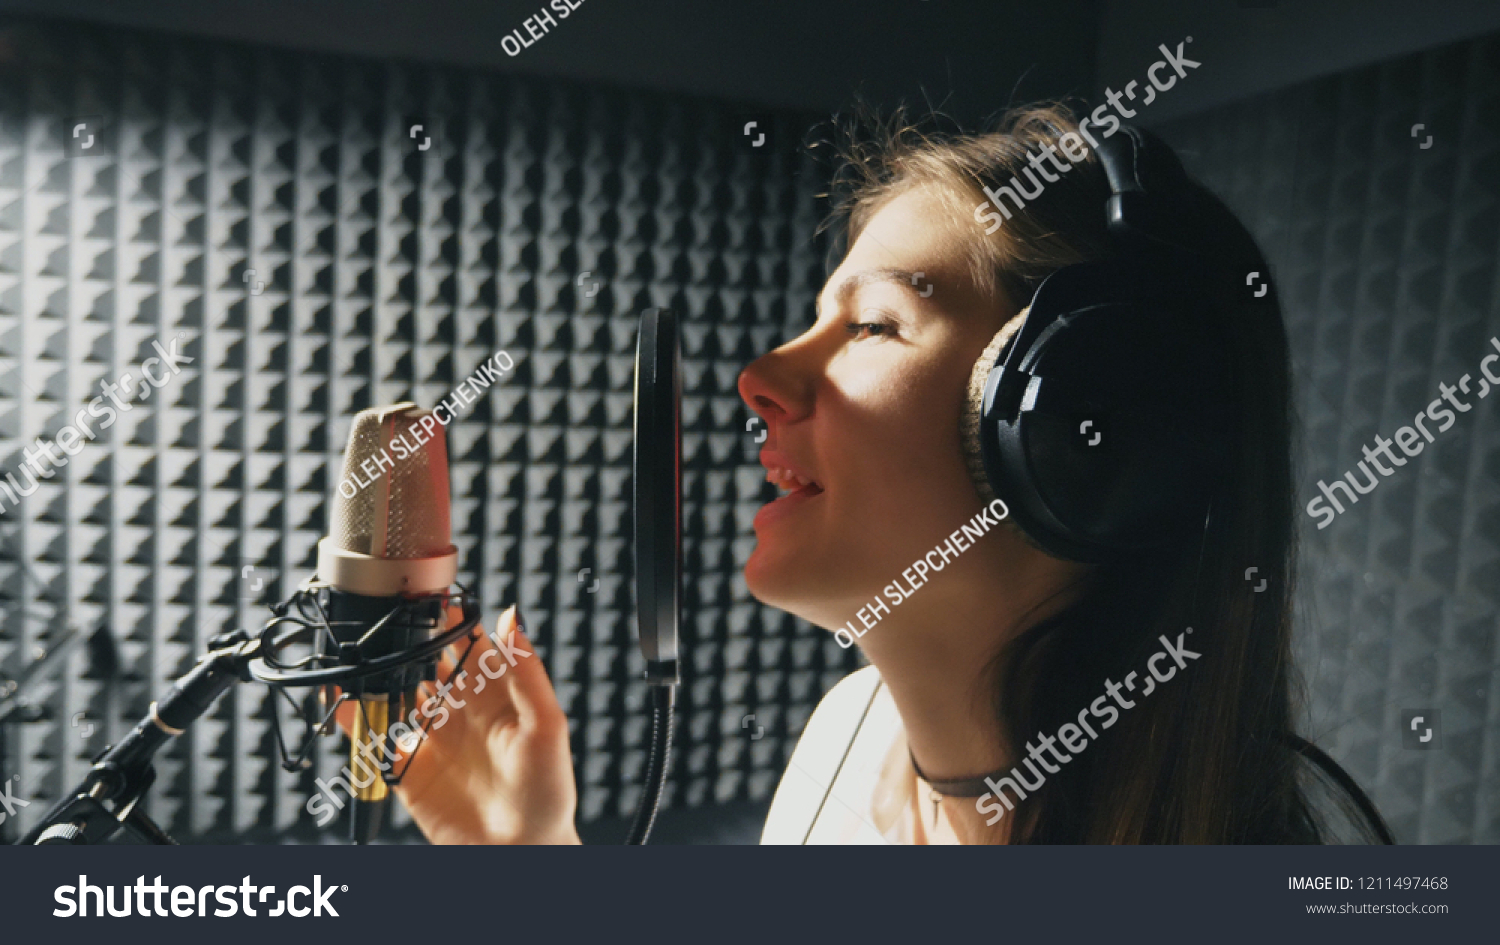 Profile of beautiful girl singing in sound studio. Young female singer emotionally recording new song. Woman sings to microphone. Working of creative musician. Show business concept. Slow motion. #1211497468